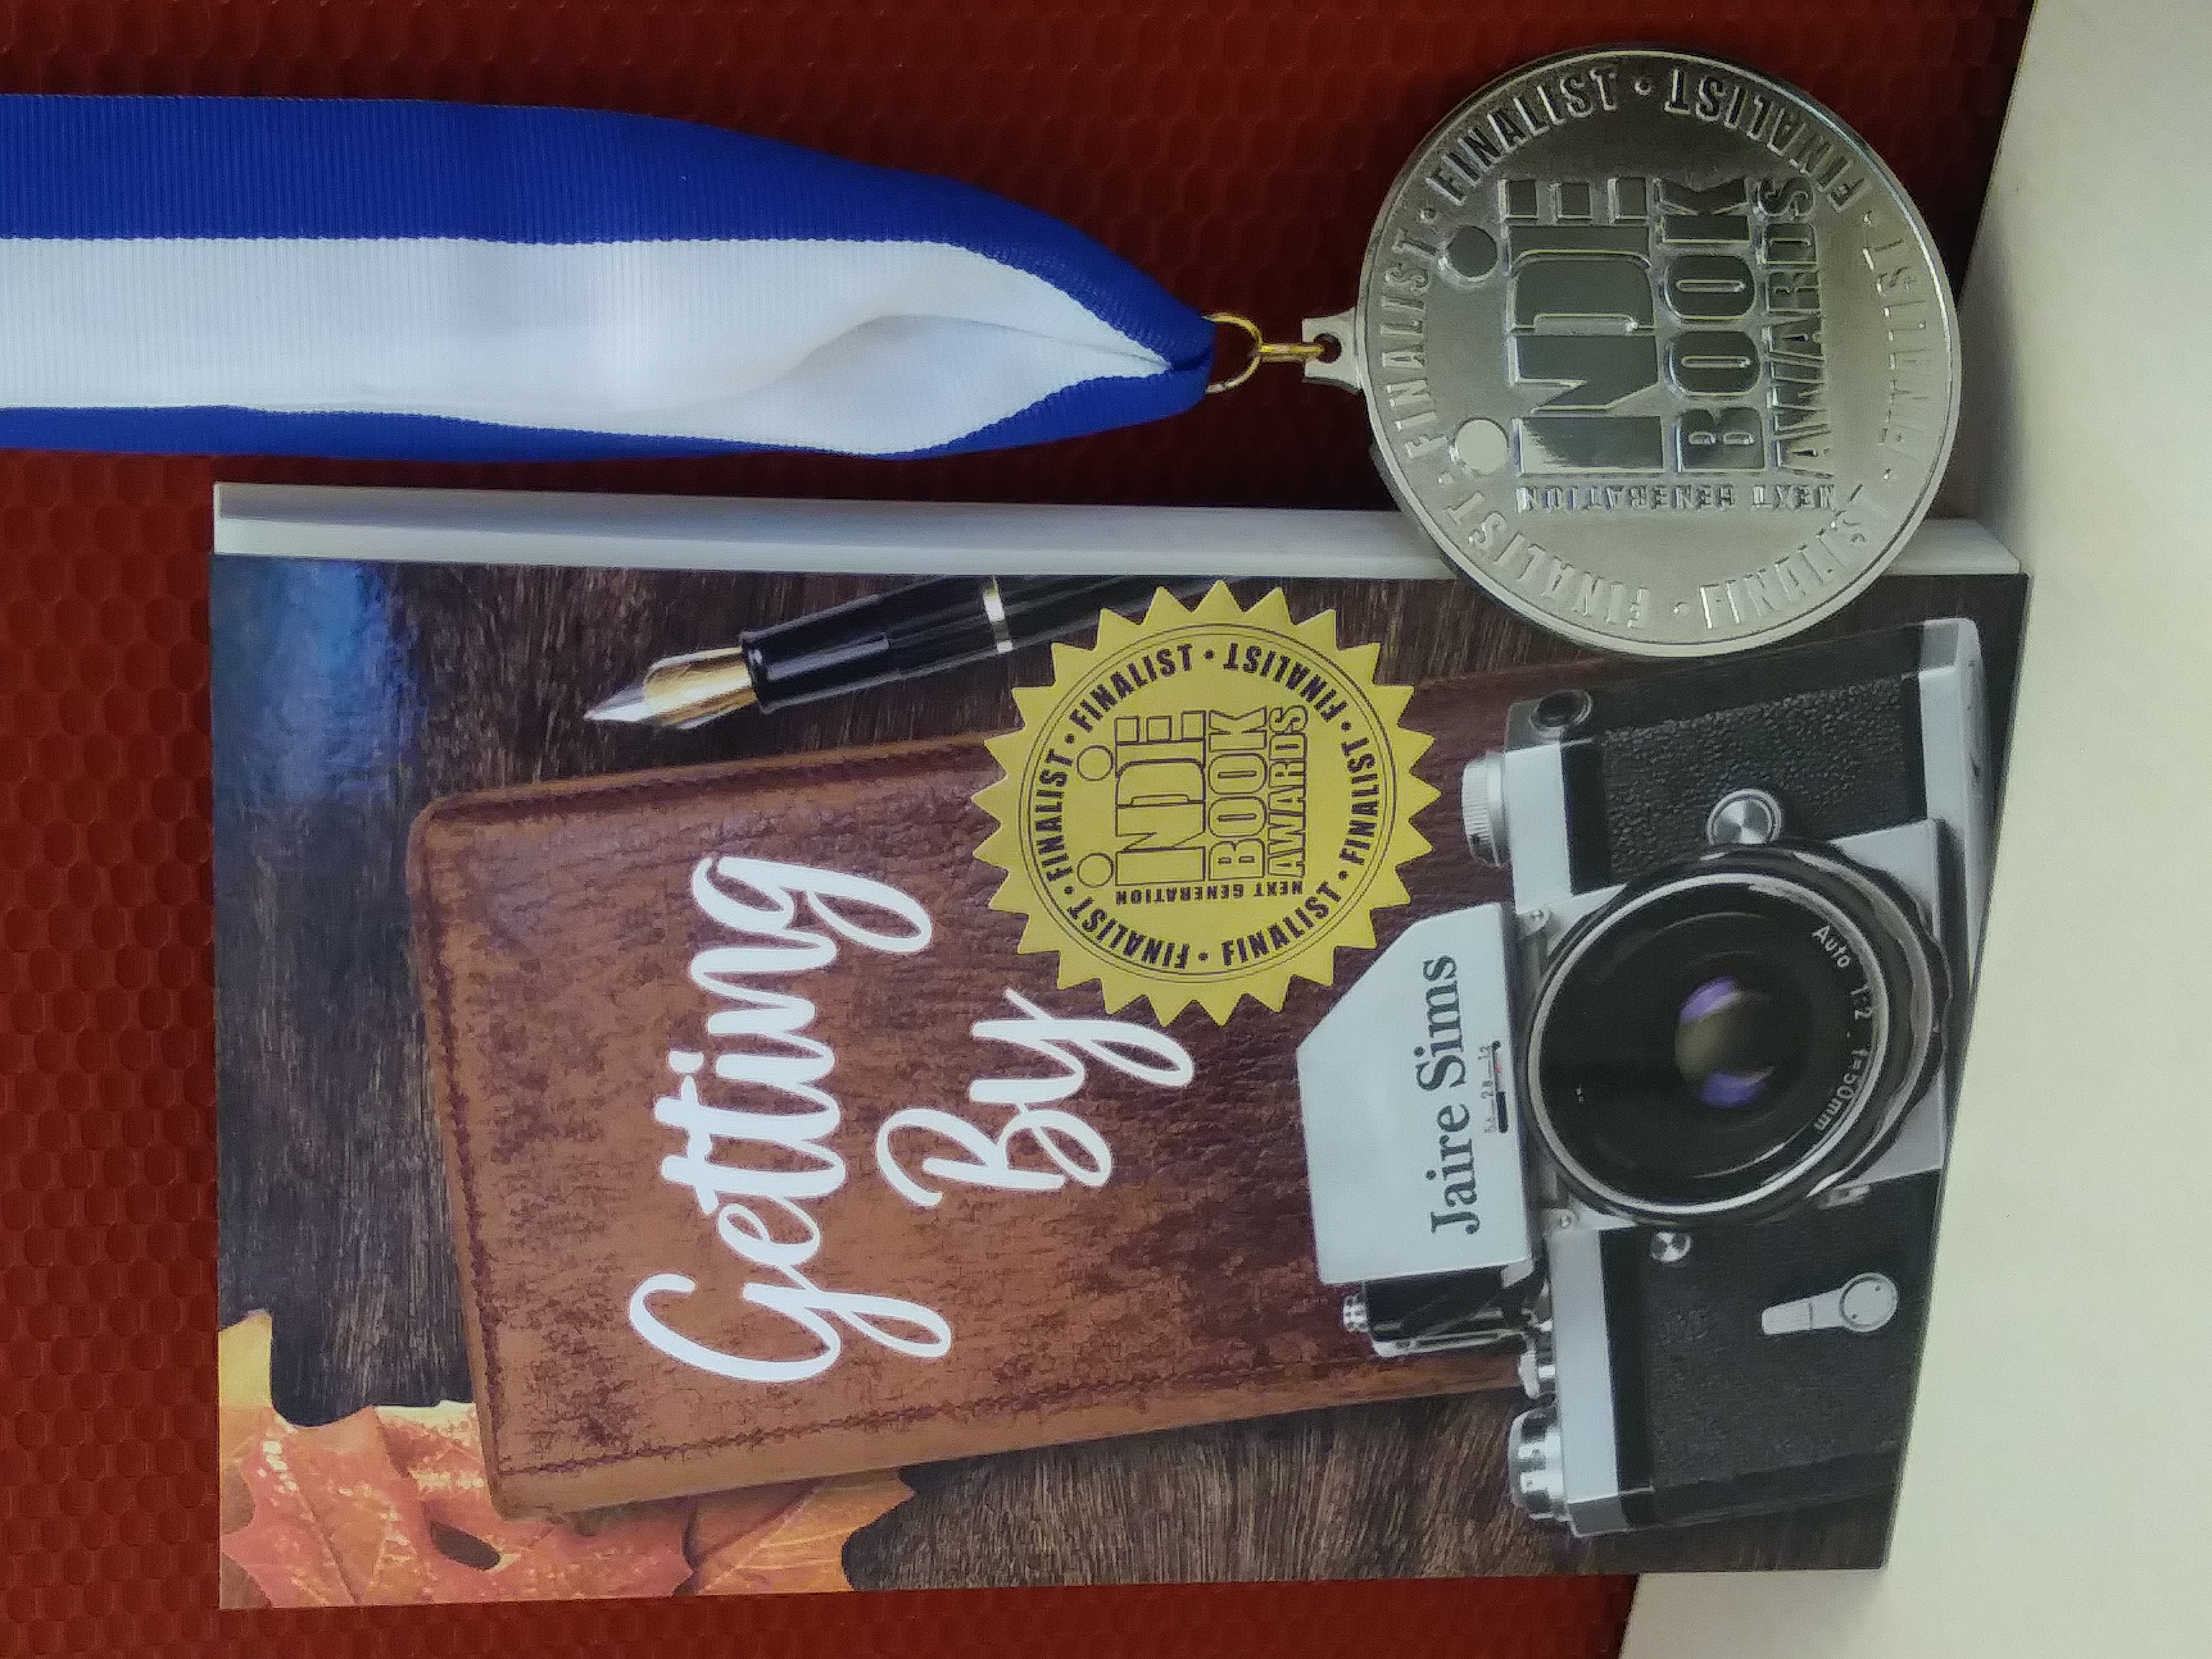 A copy of the book, Getting By, with an award sticker on the cover. Next to the book is a medal. 